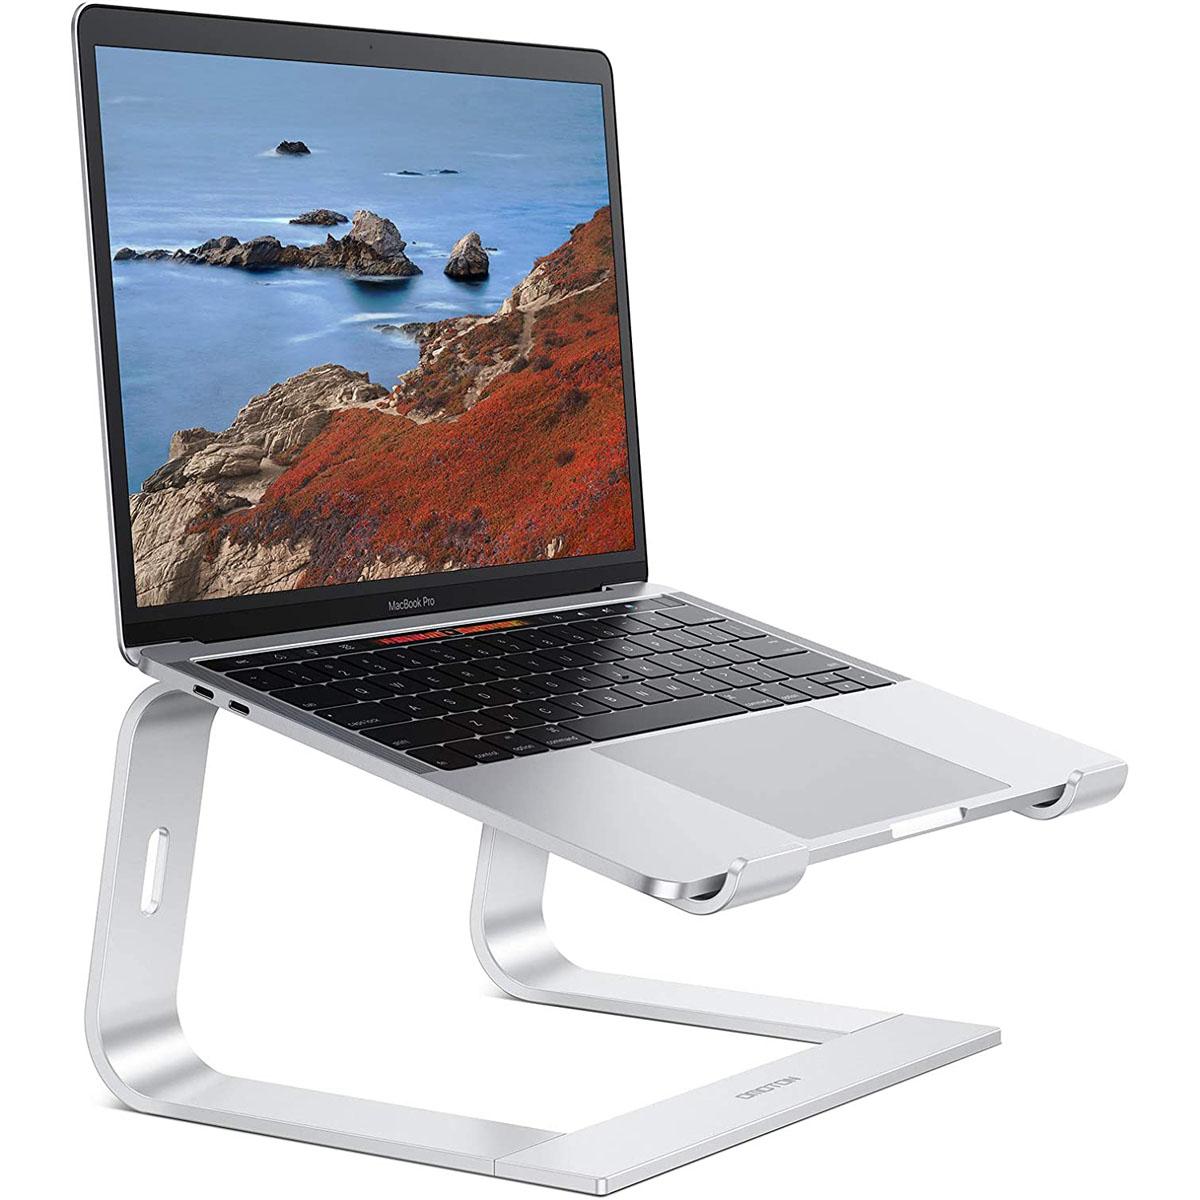 Omotion Aluminum Elevated Laptop Holder Stand for $7.80